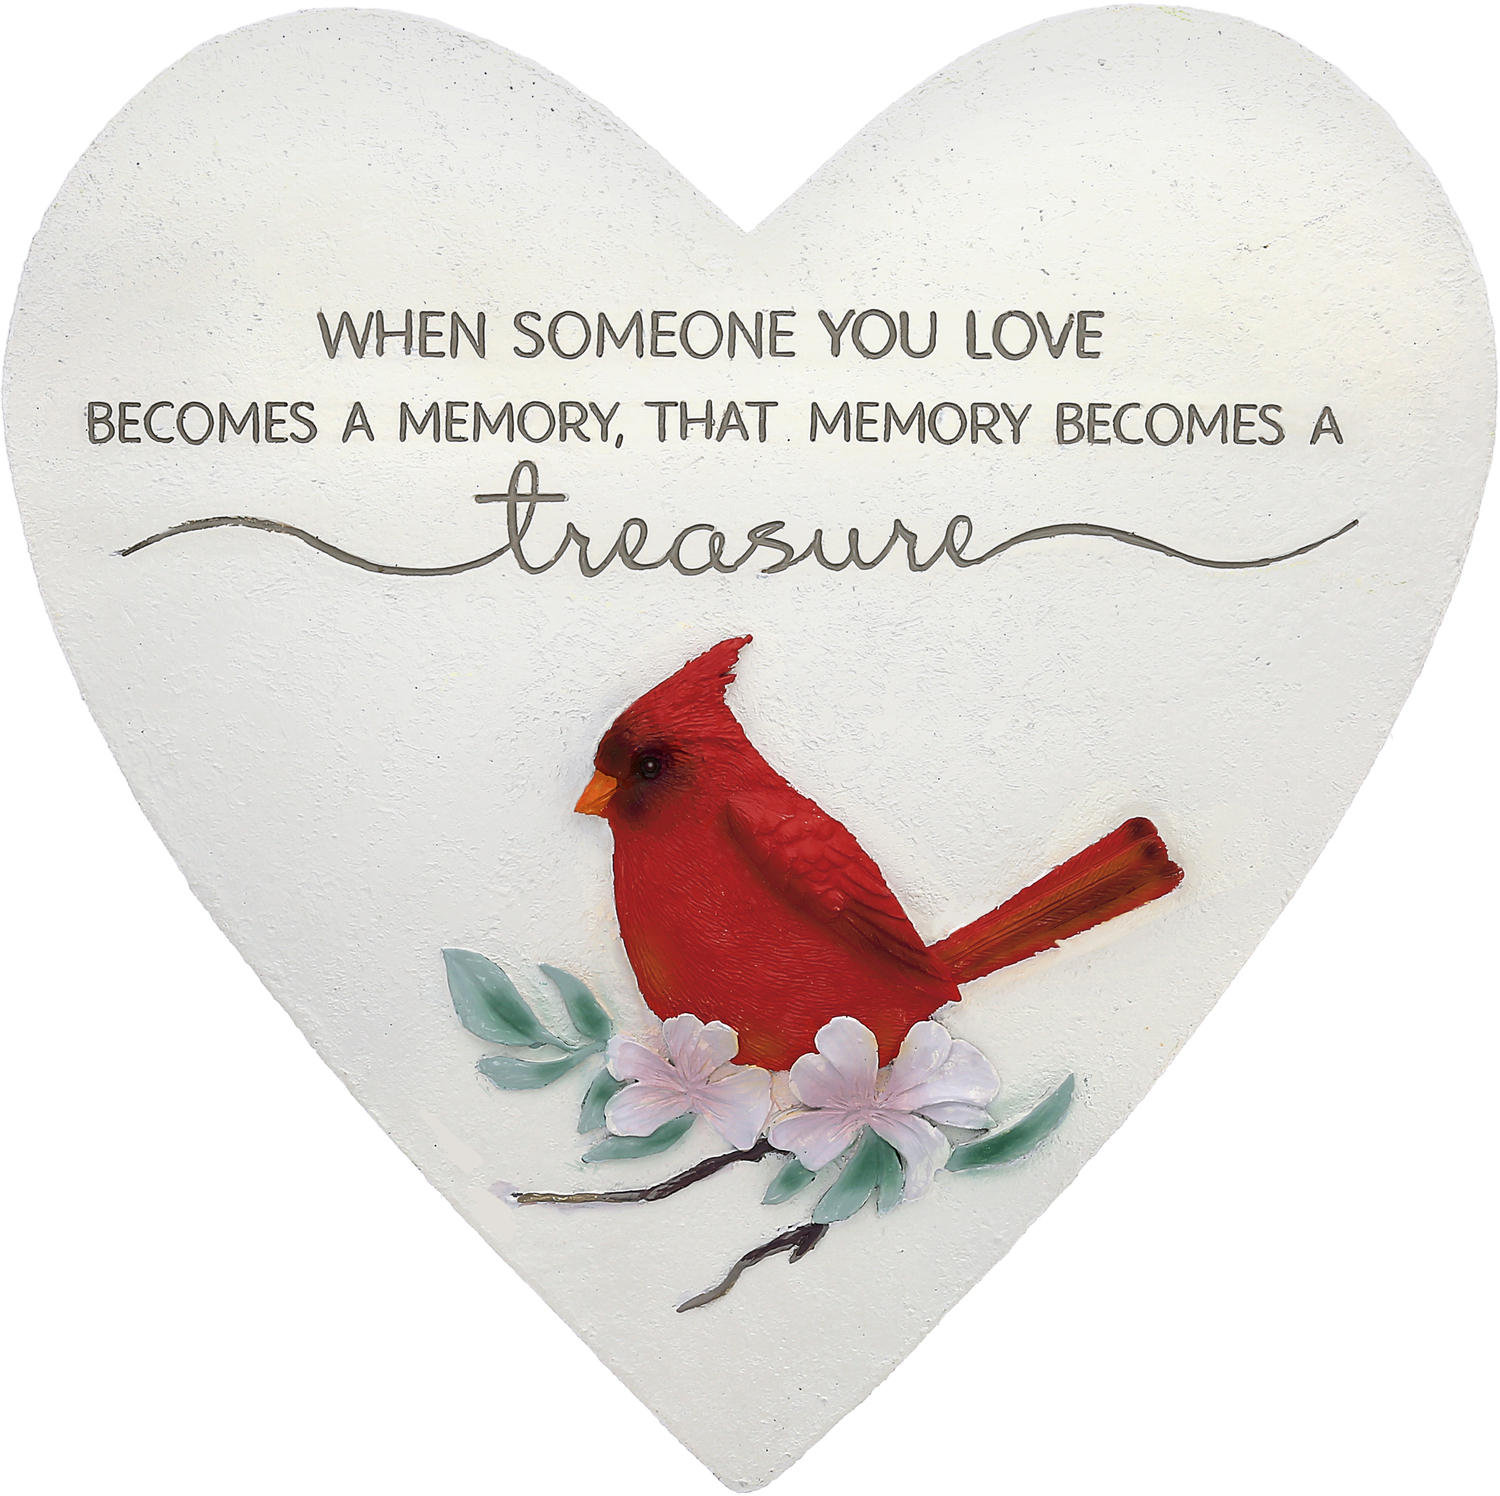 Treasure by Always by Your Side - Treasure - 11" Heart Garden Stone